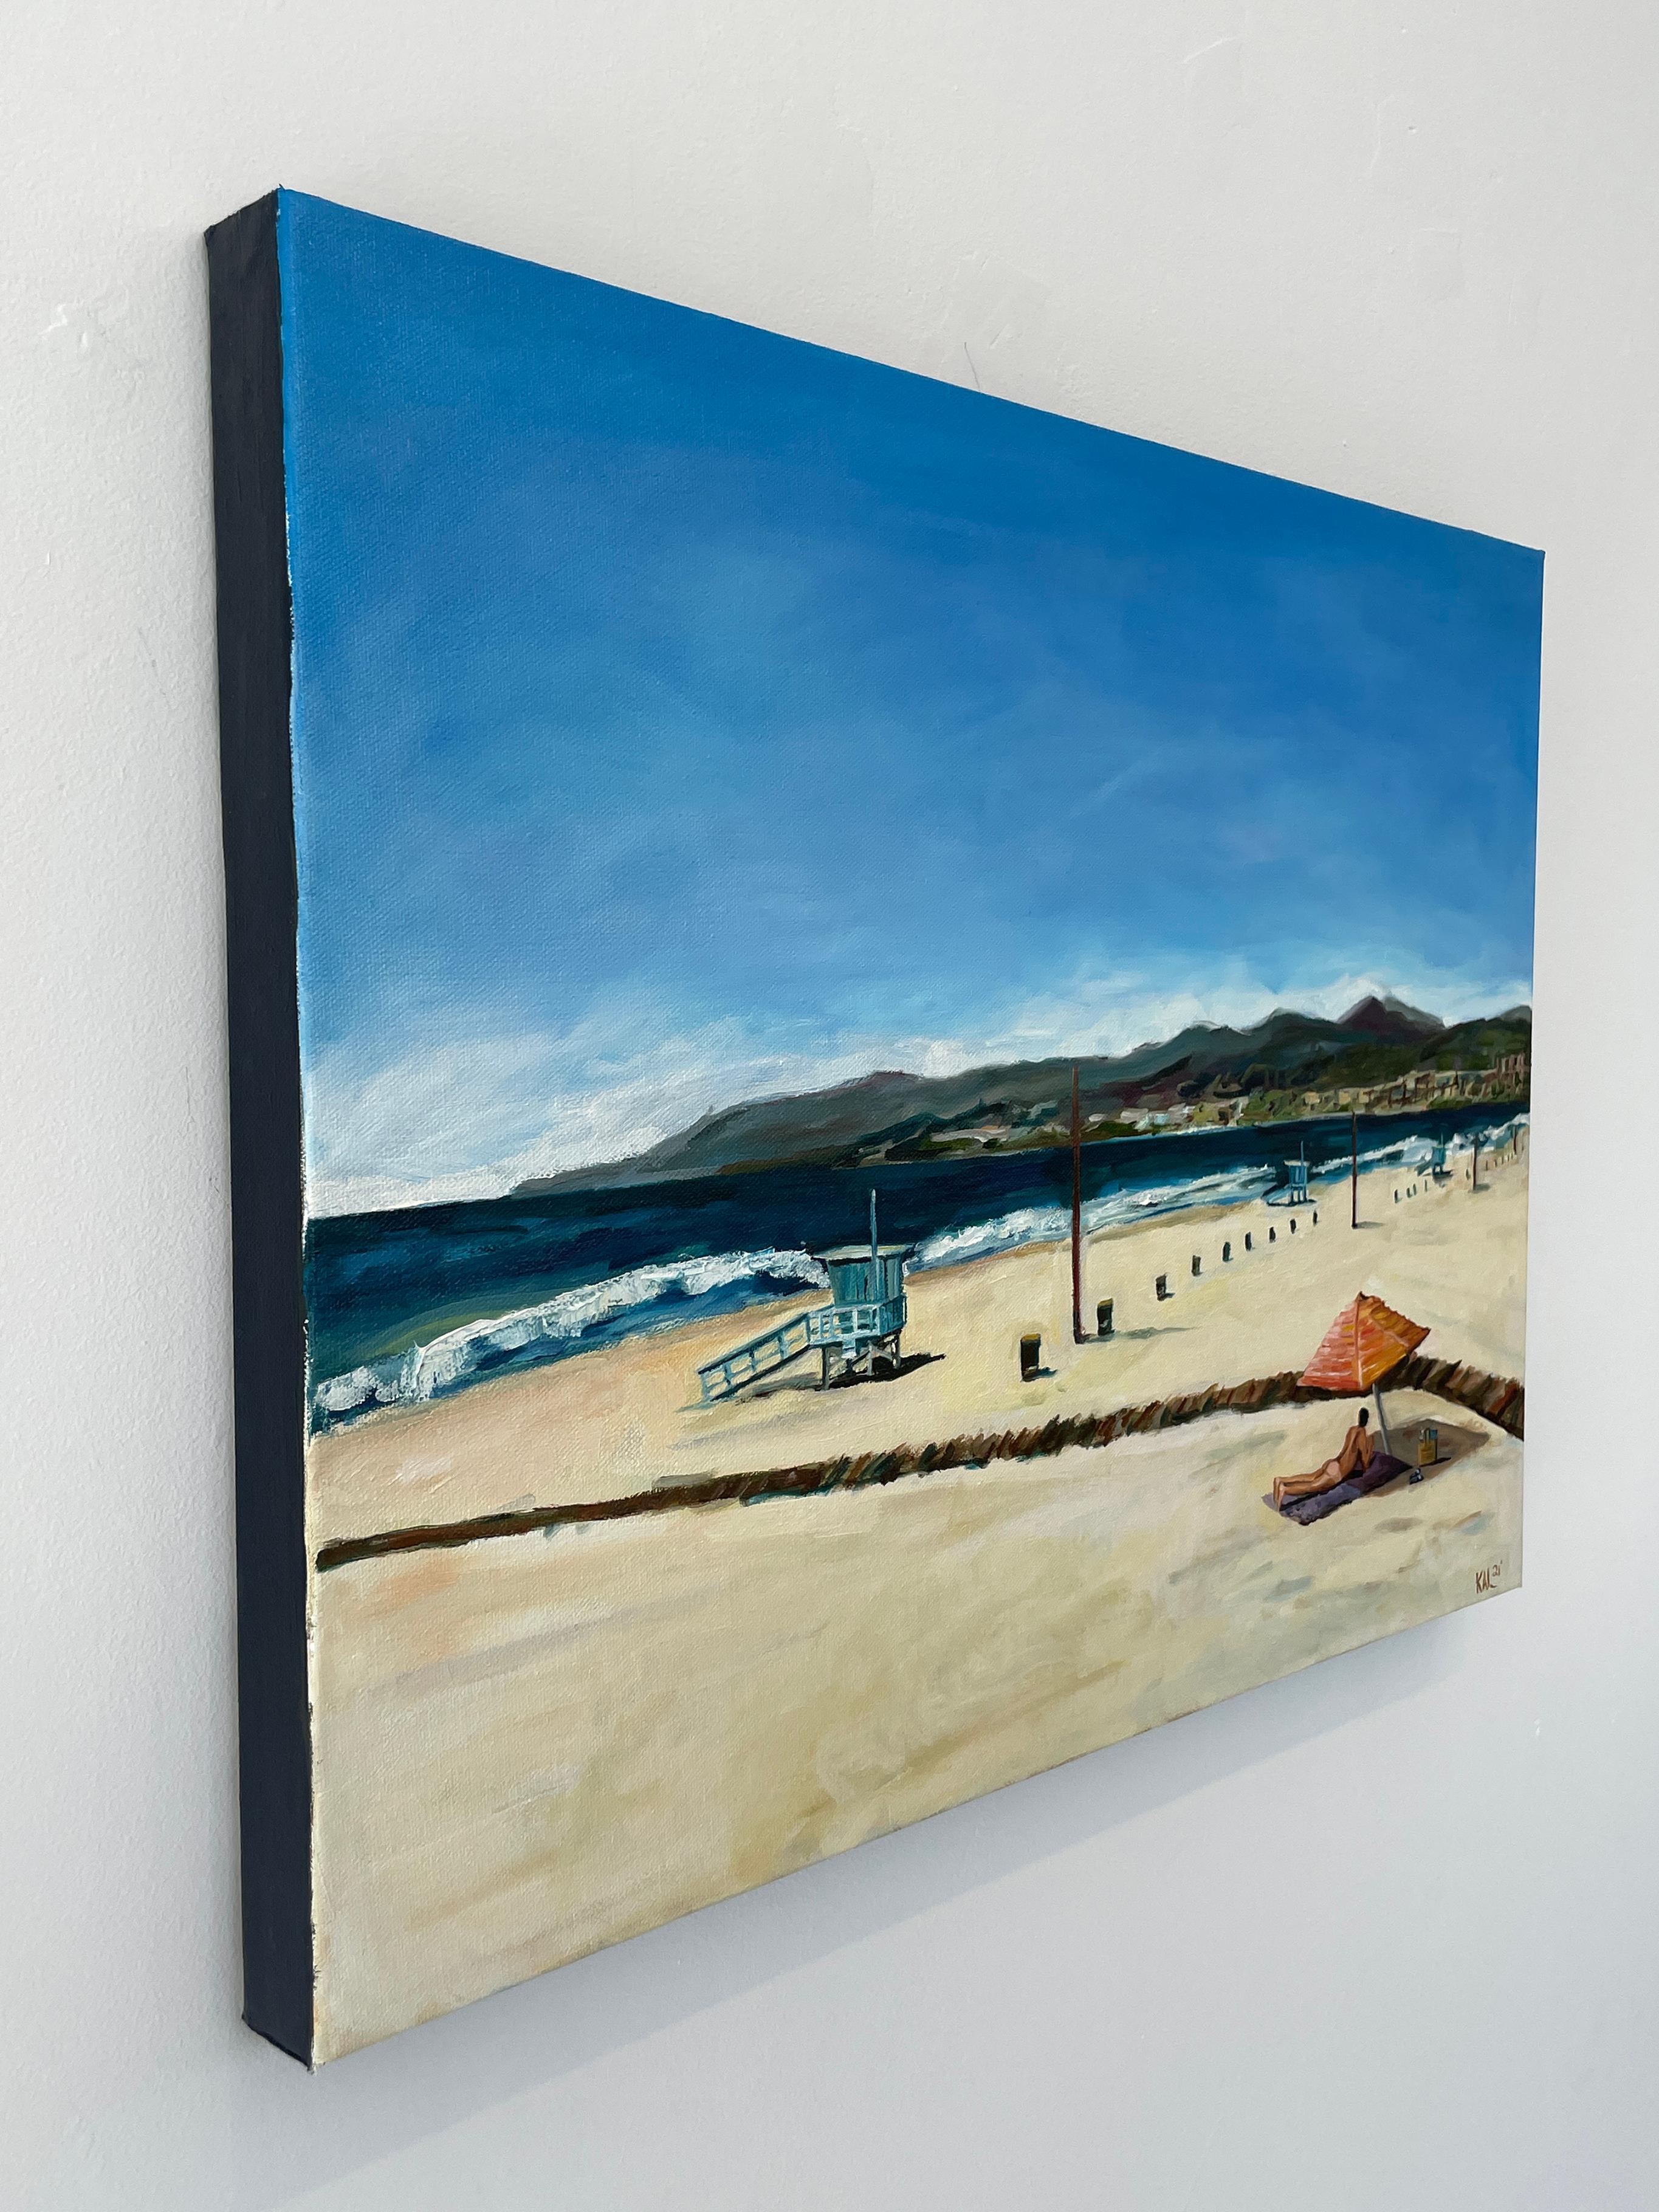 The Beachgoer- oil on canvas - Blue Figurative Painting by Kory Alexander